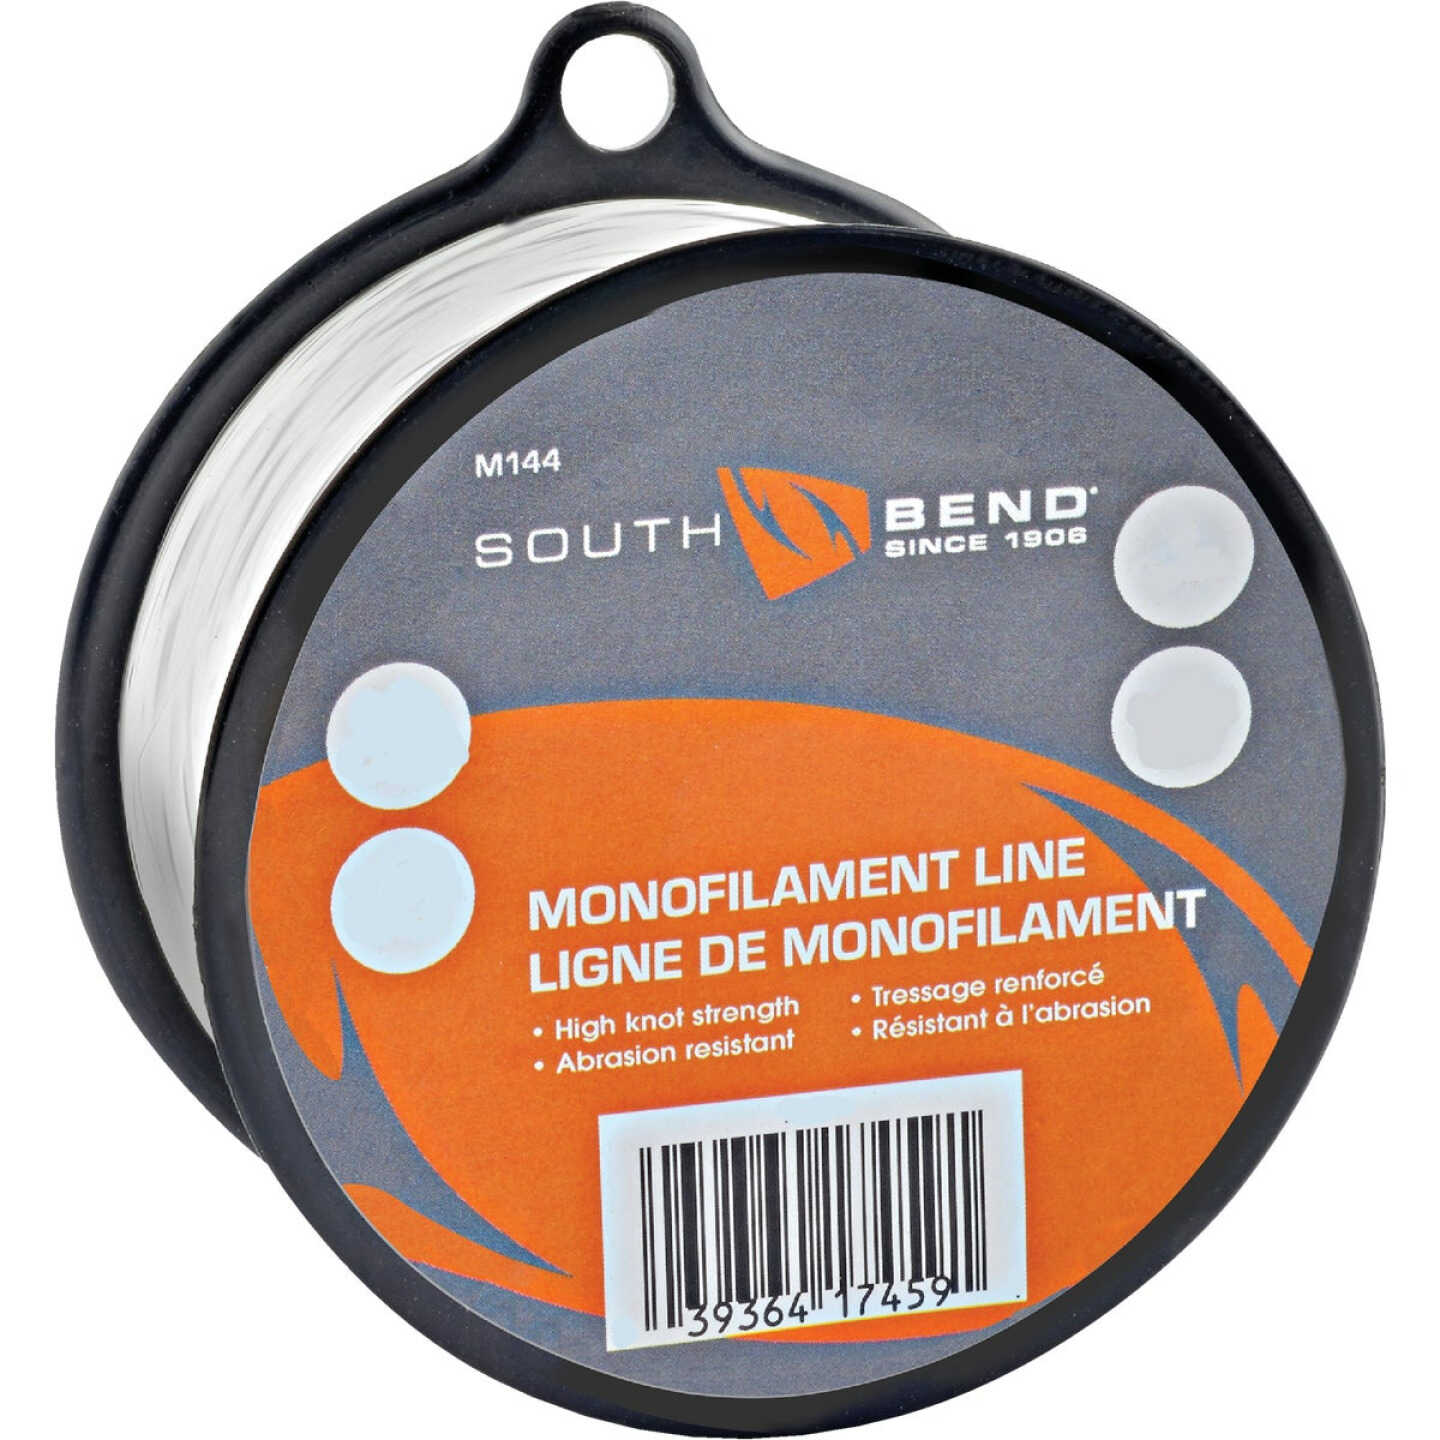 SouthBend 25 Lb. 220 Yd. Clear Monofilament Fishing Line - Close's Lumber